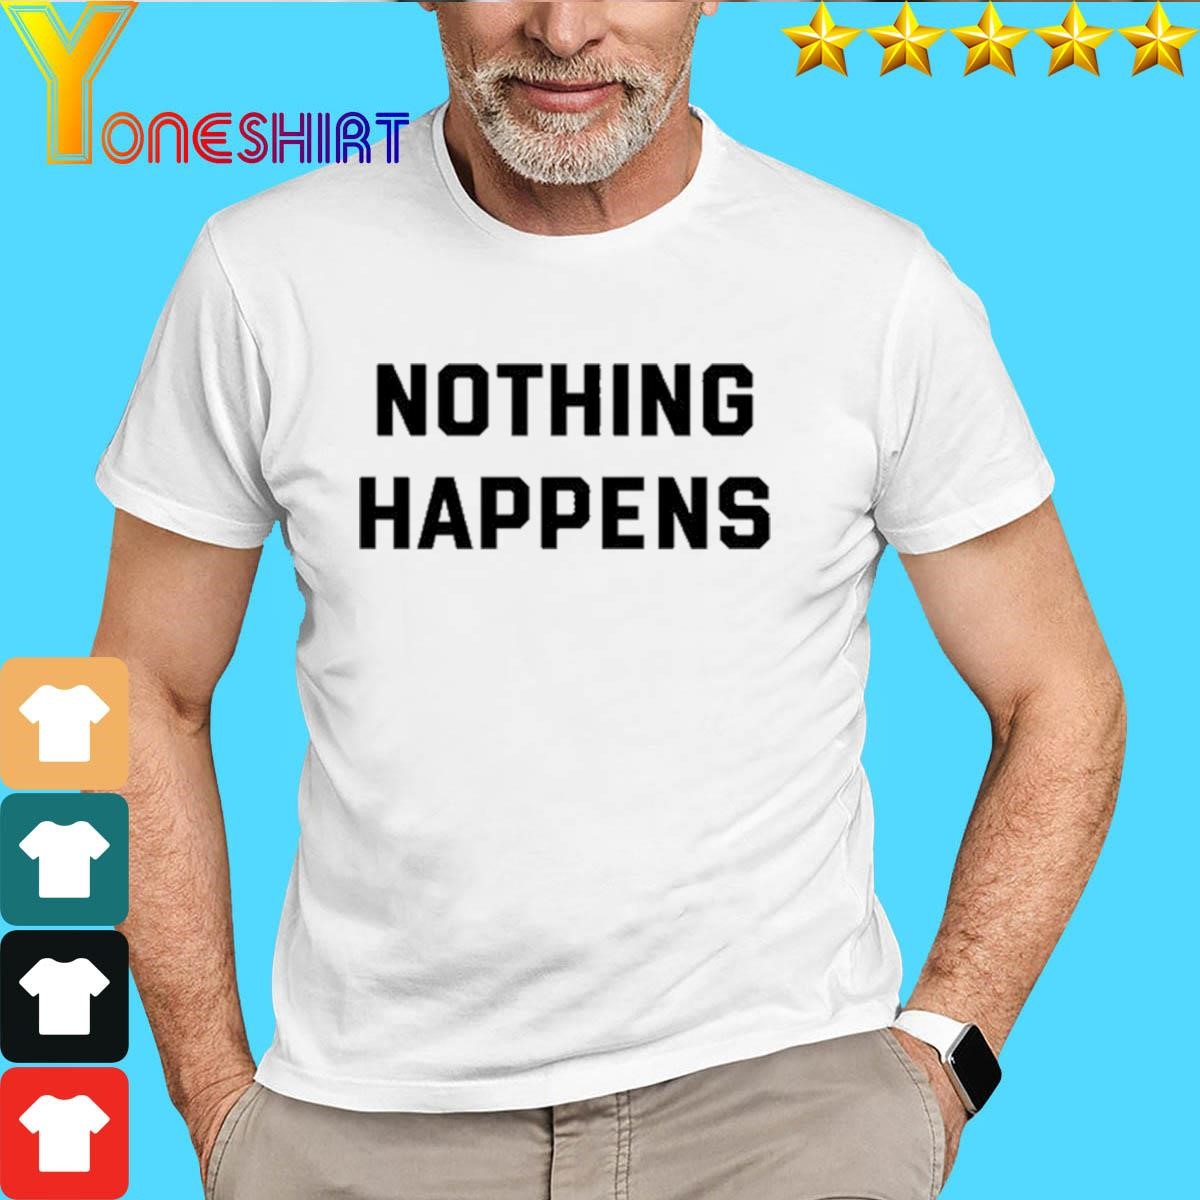 Nothing Happens shirt